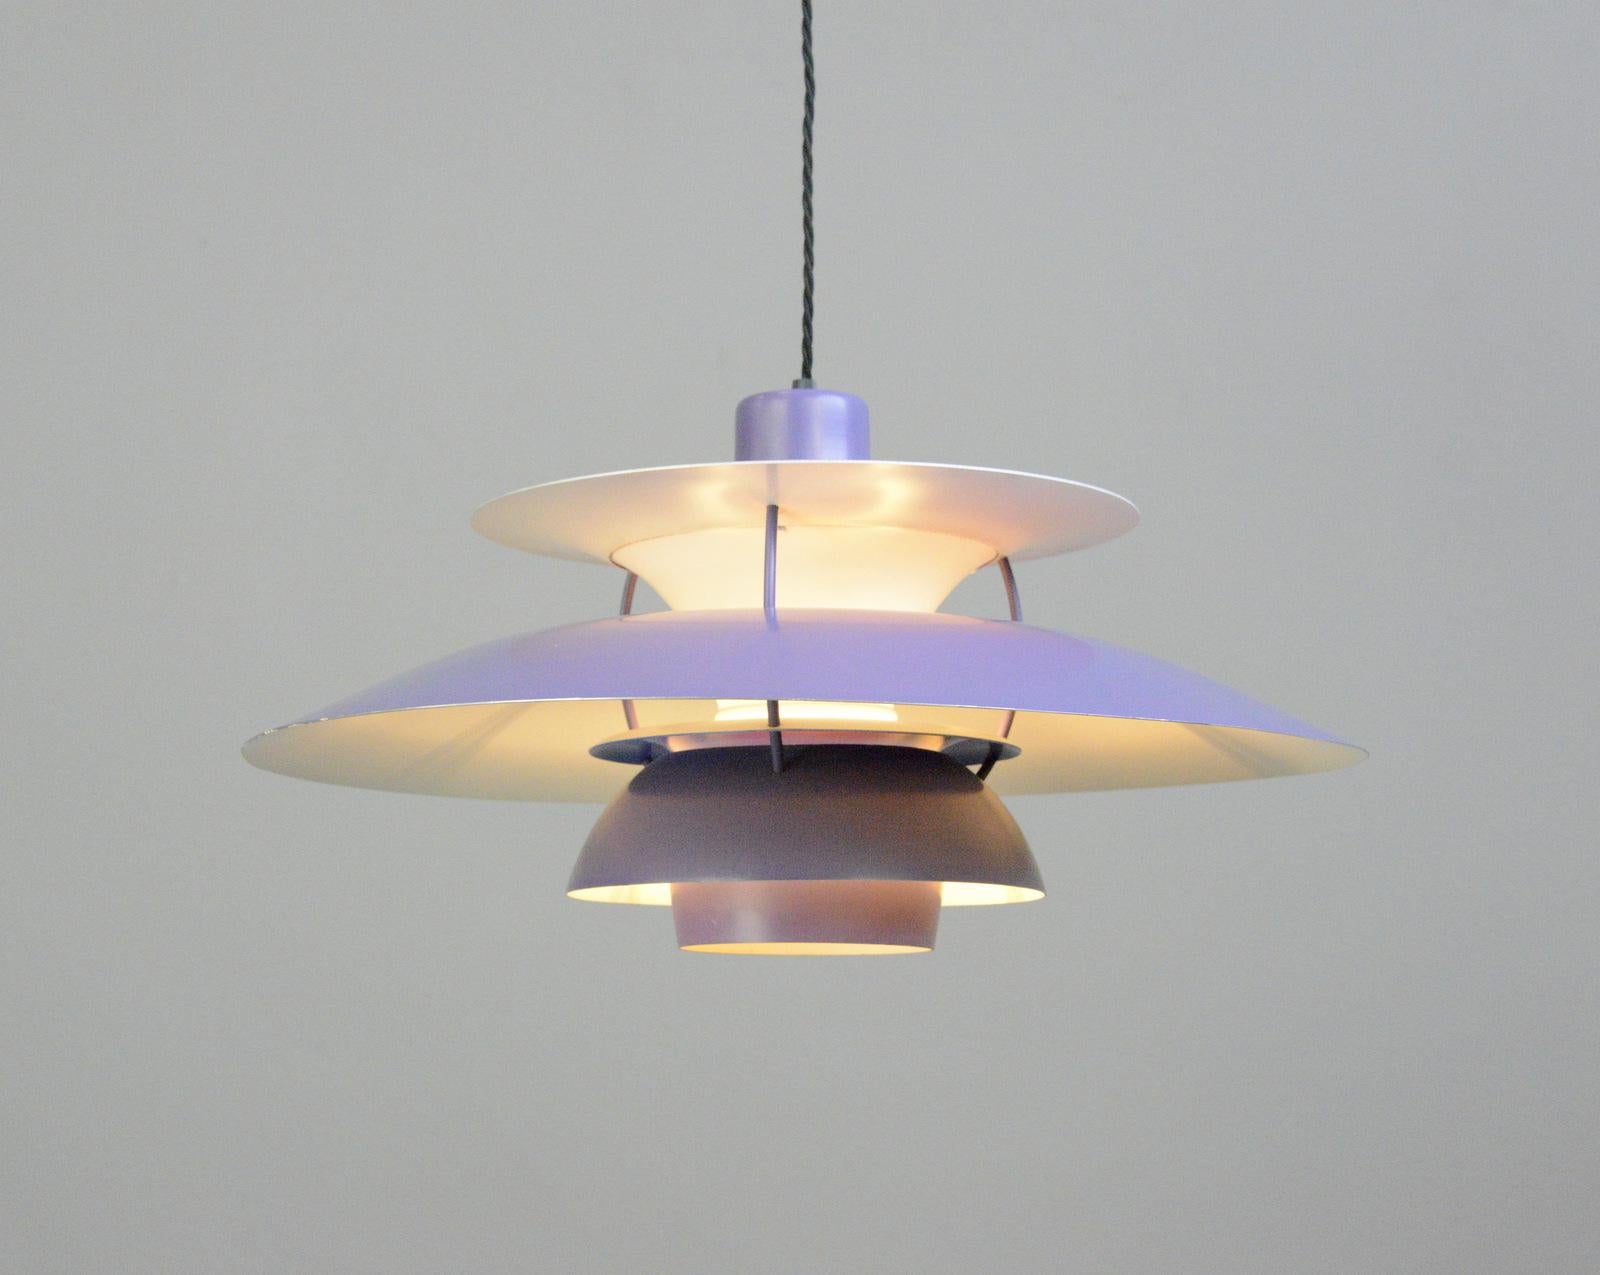 Purple model PH5 pendant lights by Louis Poulson Circa 1960s

- Comes with 150cm of cable
- Takes E27 fitting bulbs
- Purple with red details
- Made from aluminium
- Designed by Poul Henningsen
- Made by Louis Poulson
- Model PH5
- Danish ~